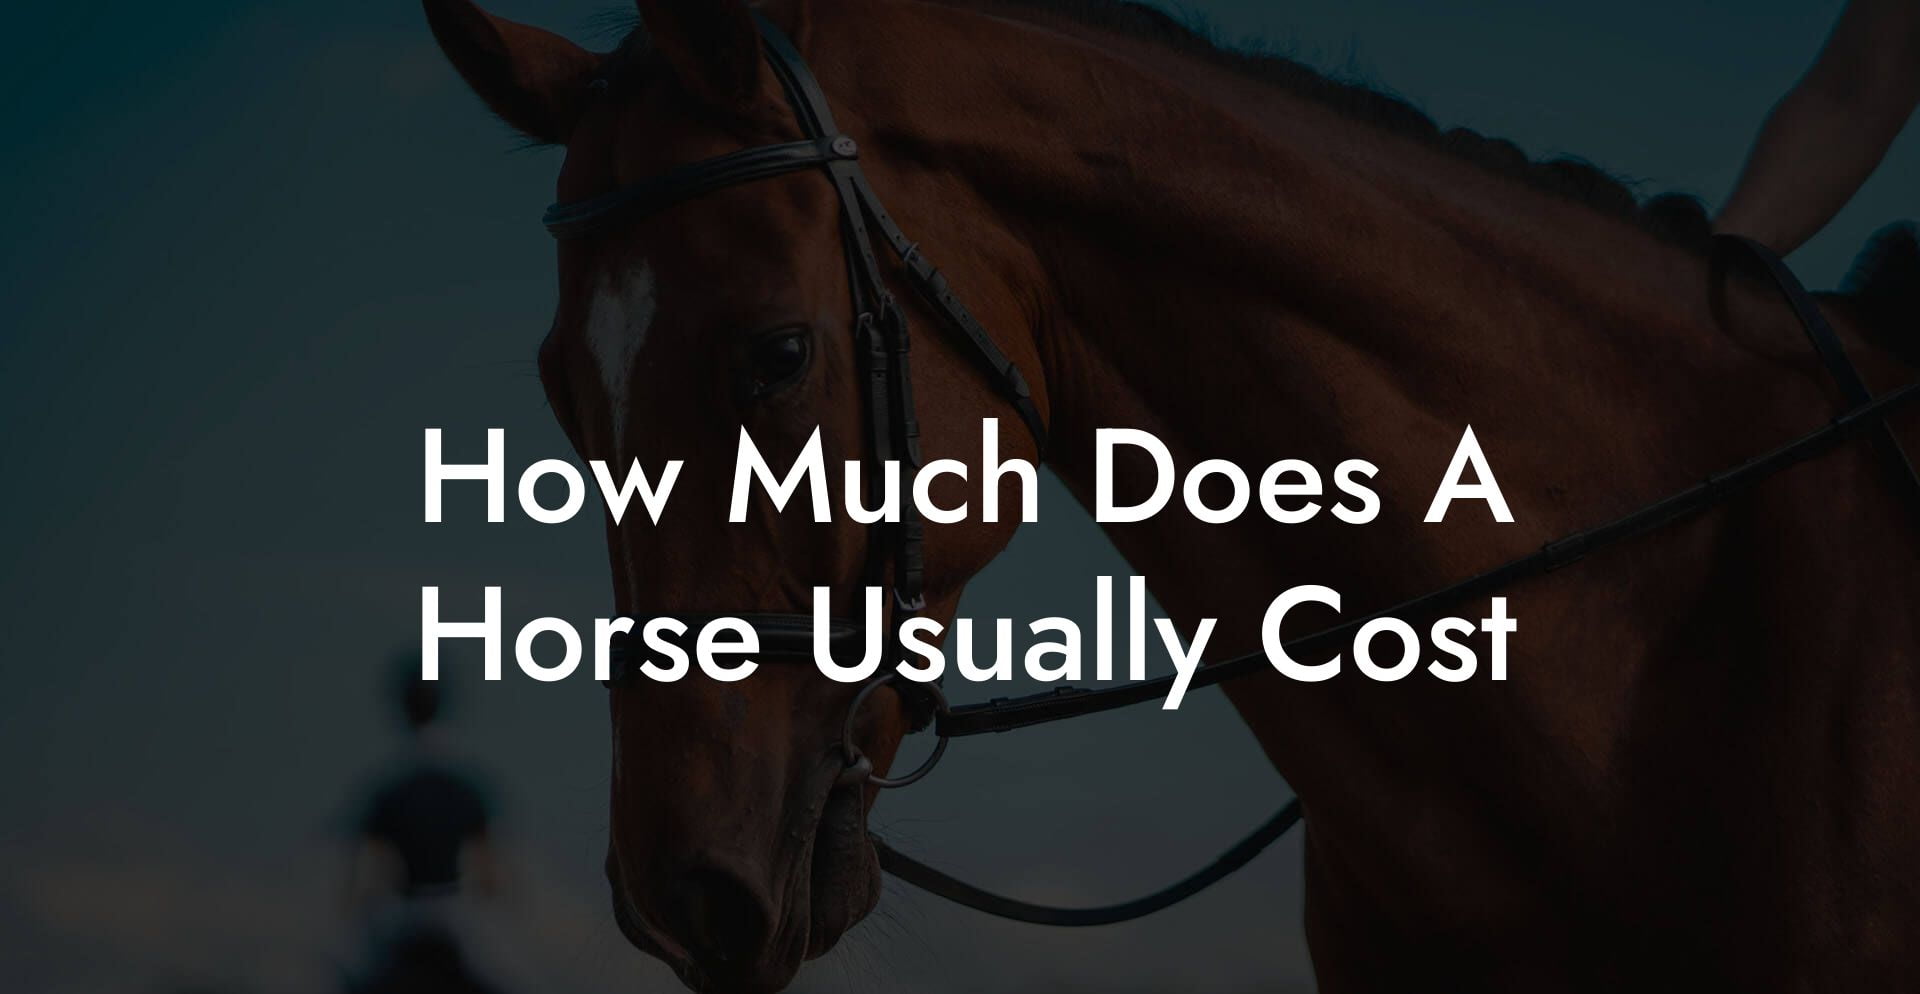 How Much Does A Horse Usually Cost